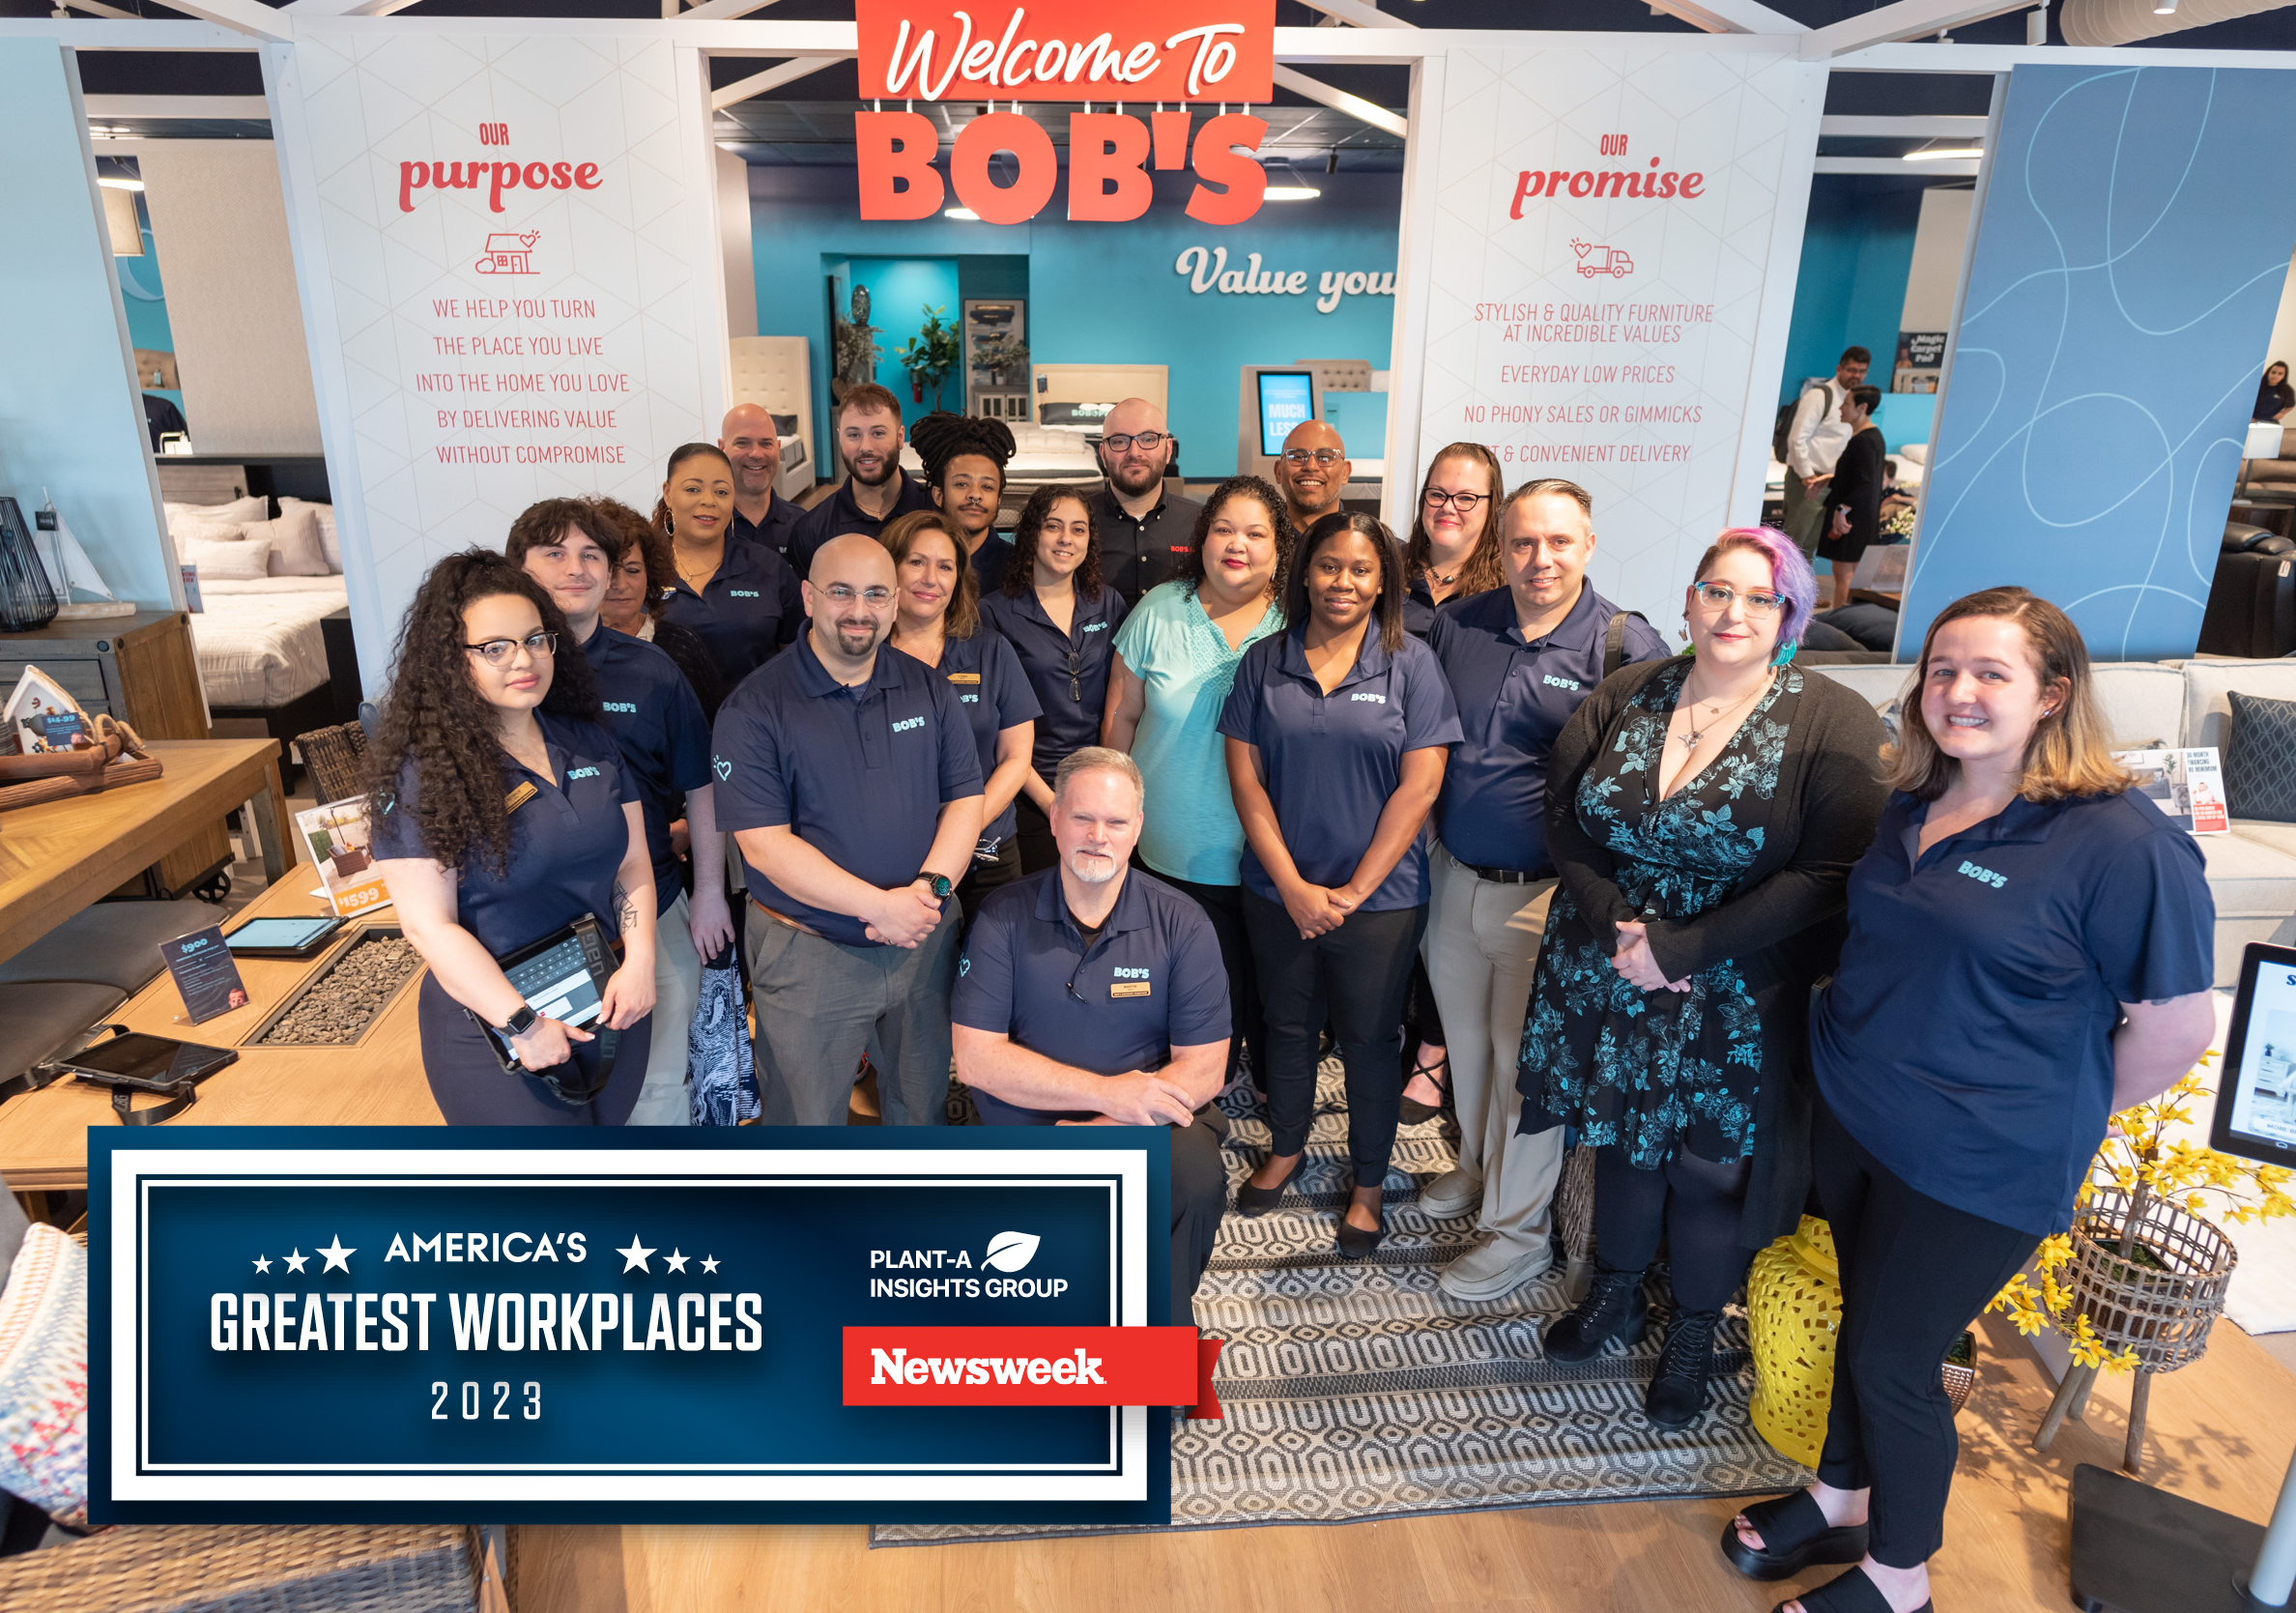 Newsweek Names Bob’s Discount Furniture One of “America’s Greatest Workplaces” for 2023